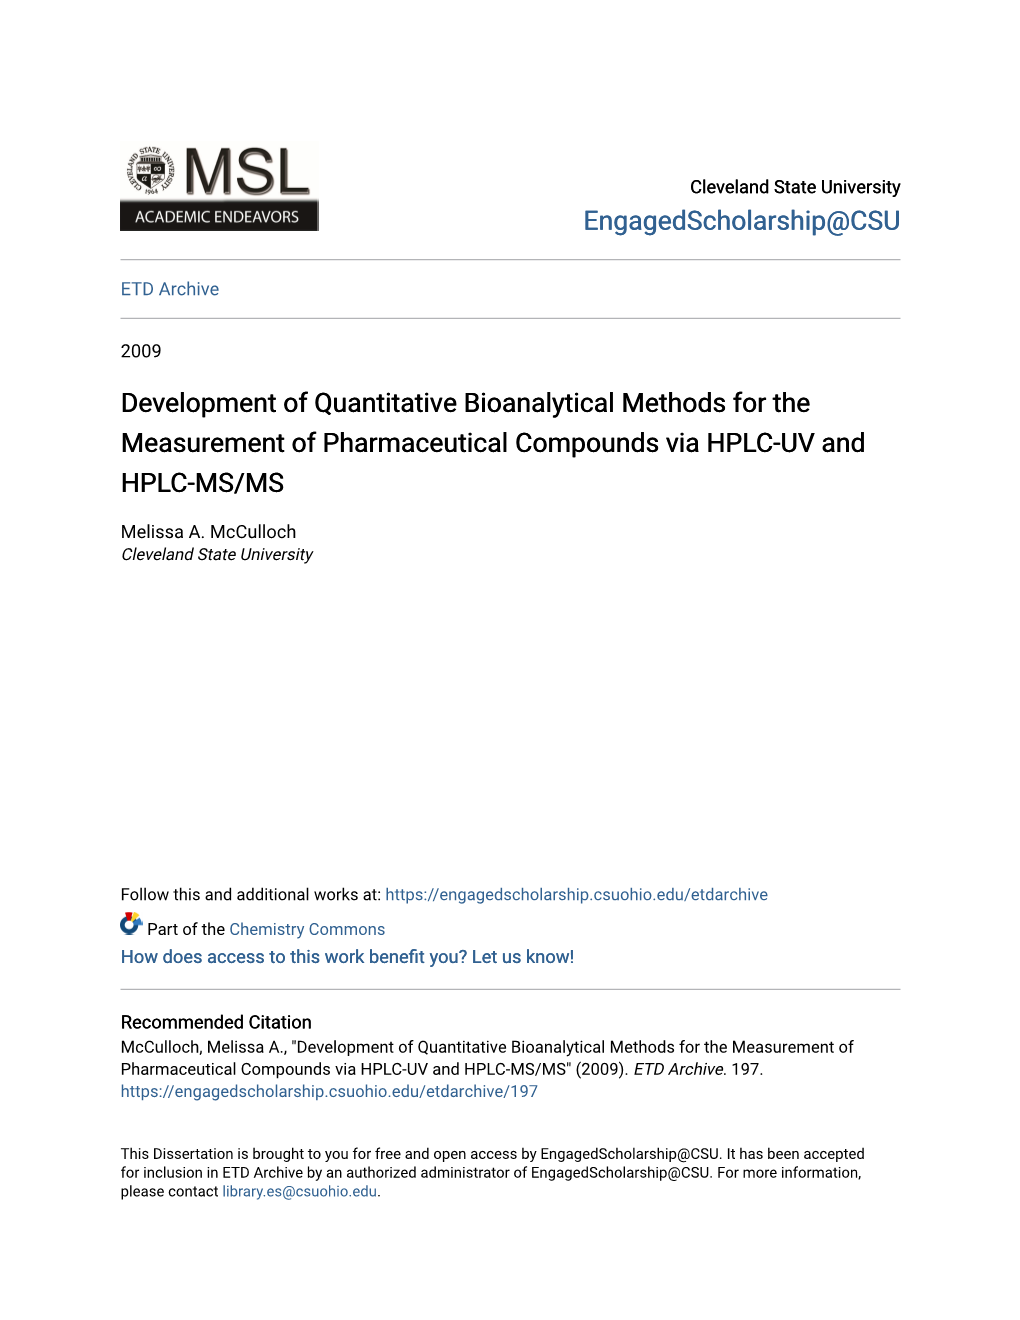 Development of Quantitative Bioanalytical Methods for the Measurement of Pharmaceutical Compounds Via HPLC-UV and HPLC-MS/MS